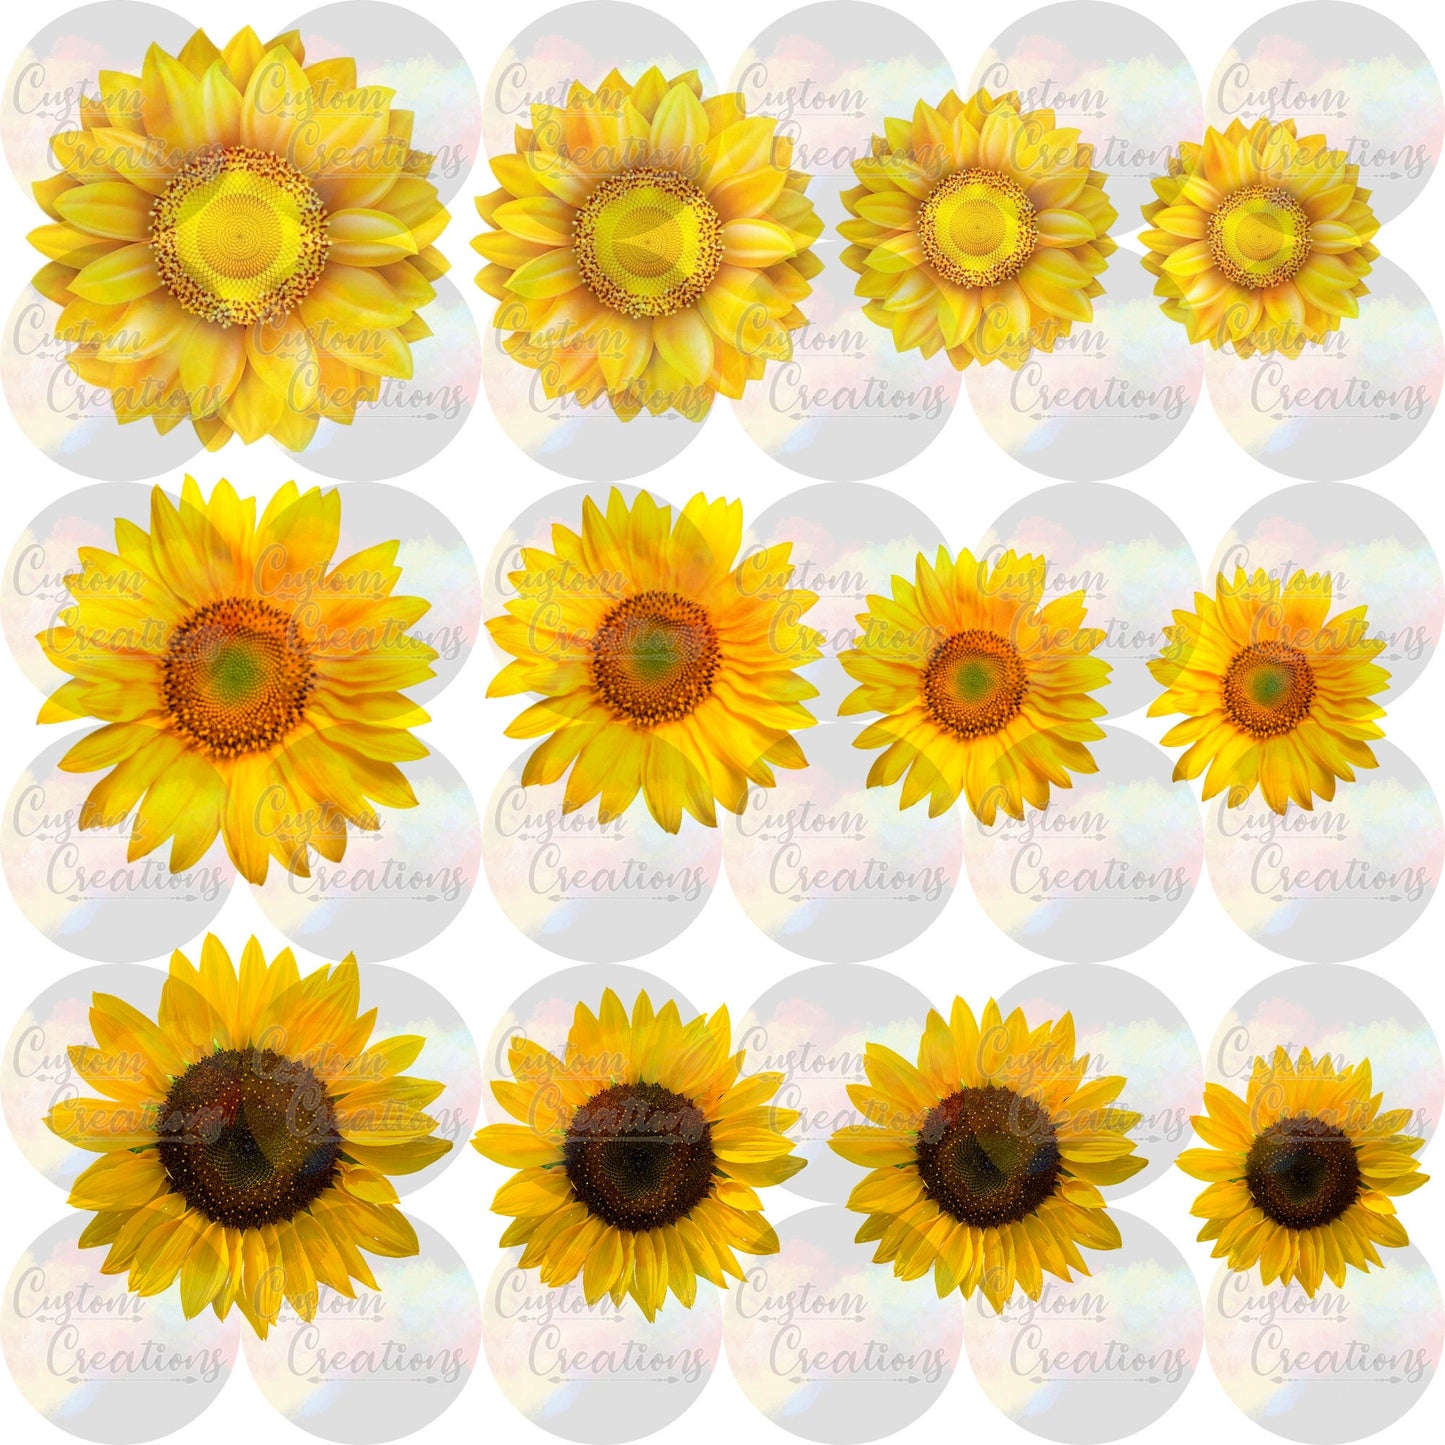 Sunflower Page A4 Printed Page Clear Laser Printed Waterslide